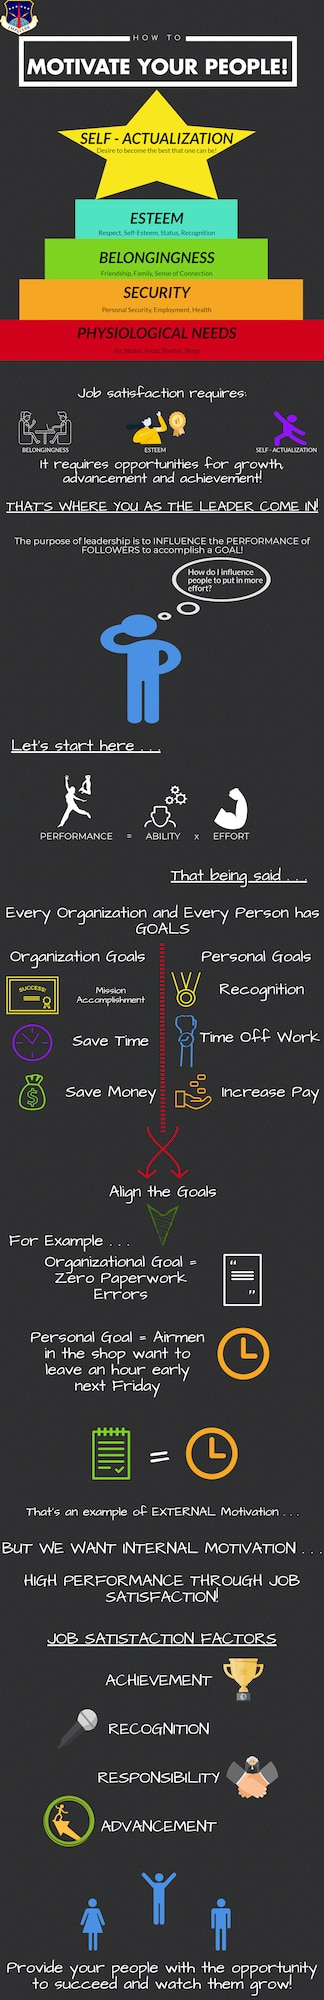 A graphic explaining how to link mission goals with personal goals to motivate people to accomplish the mission at F.E. Warren AFB, Wyoming, on March 21, 2019.